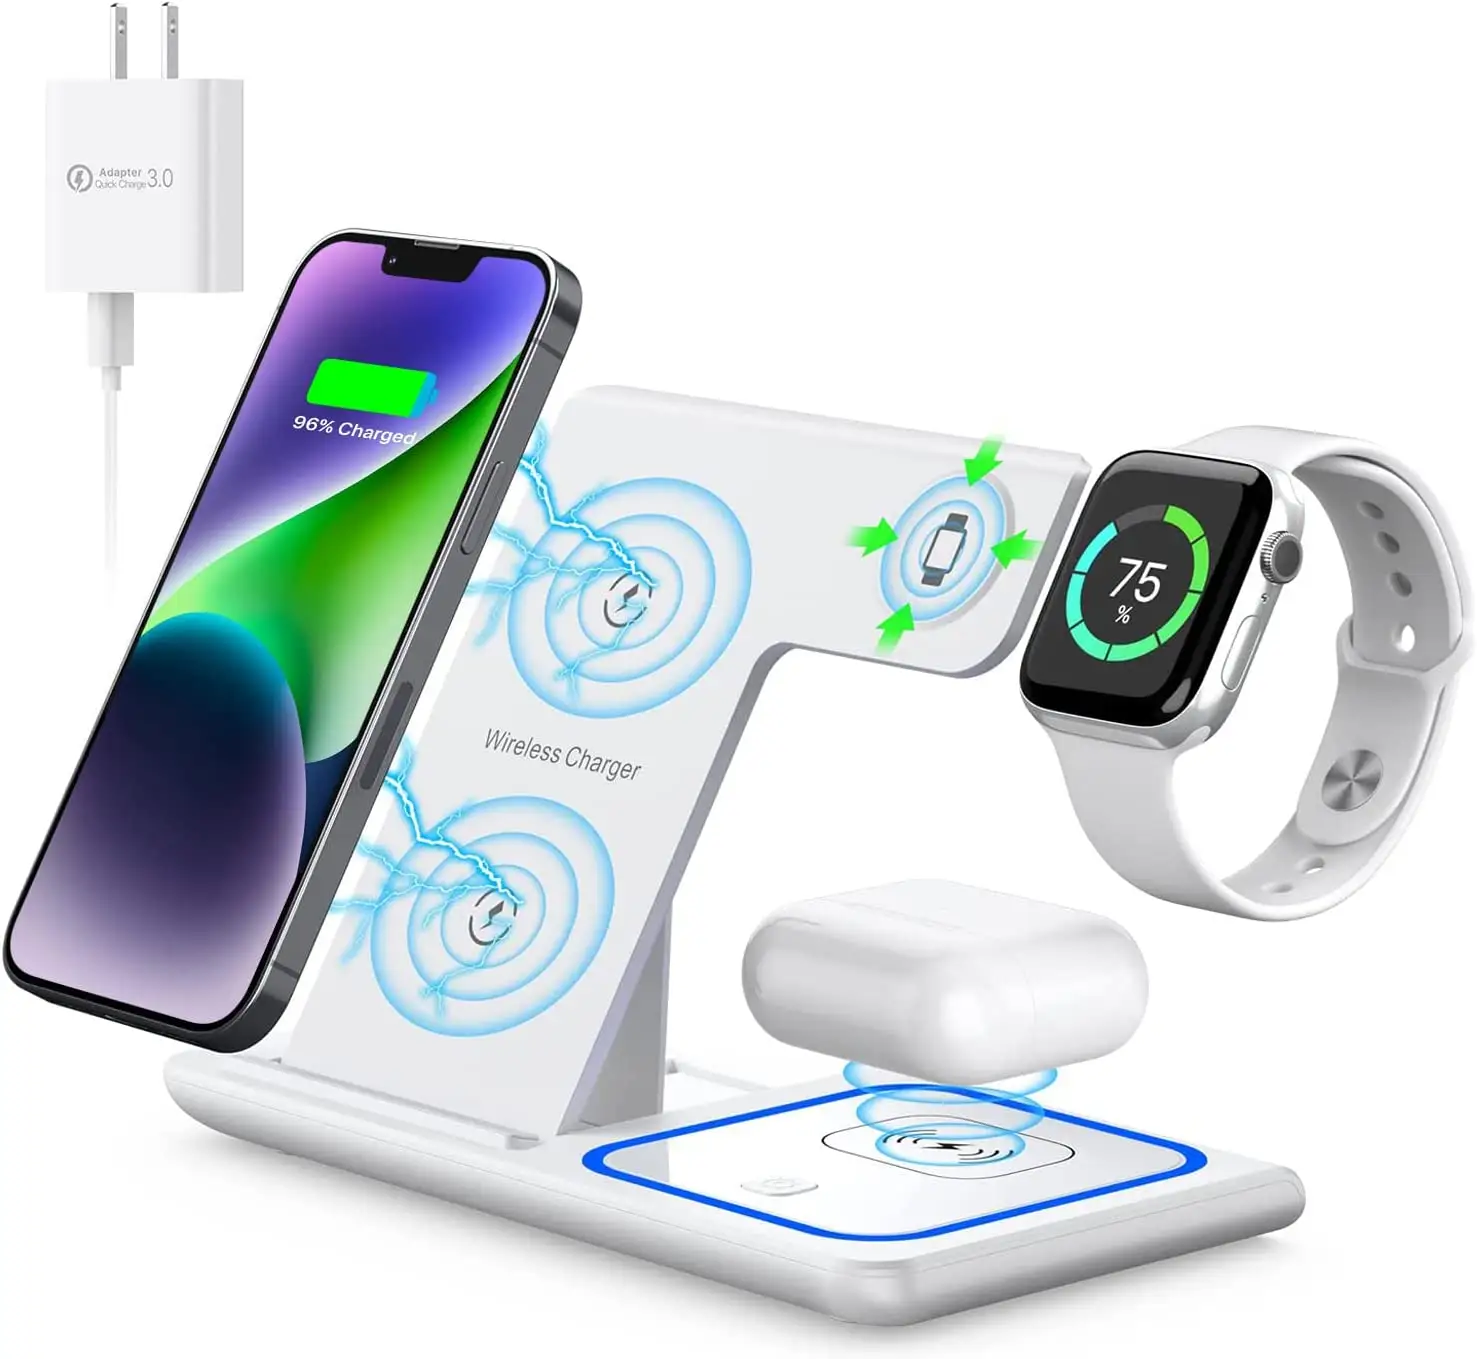 2022 Newest 3 in 1 Wireless Charger Hot Fast Charging 4 in 1 15W Foldable Phone Wireless Charger for iPhone iWatch Airpods